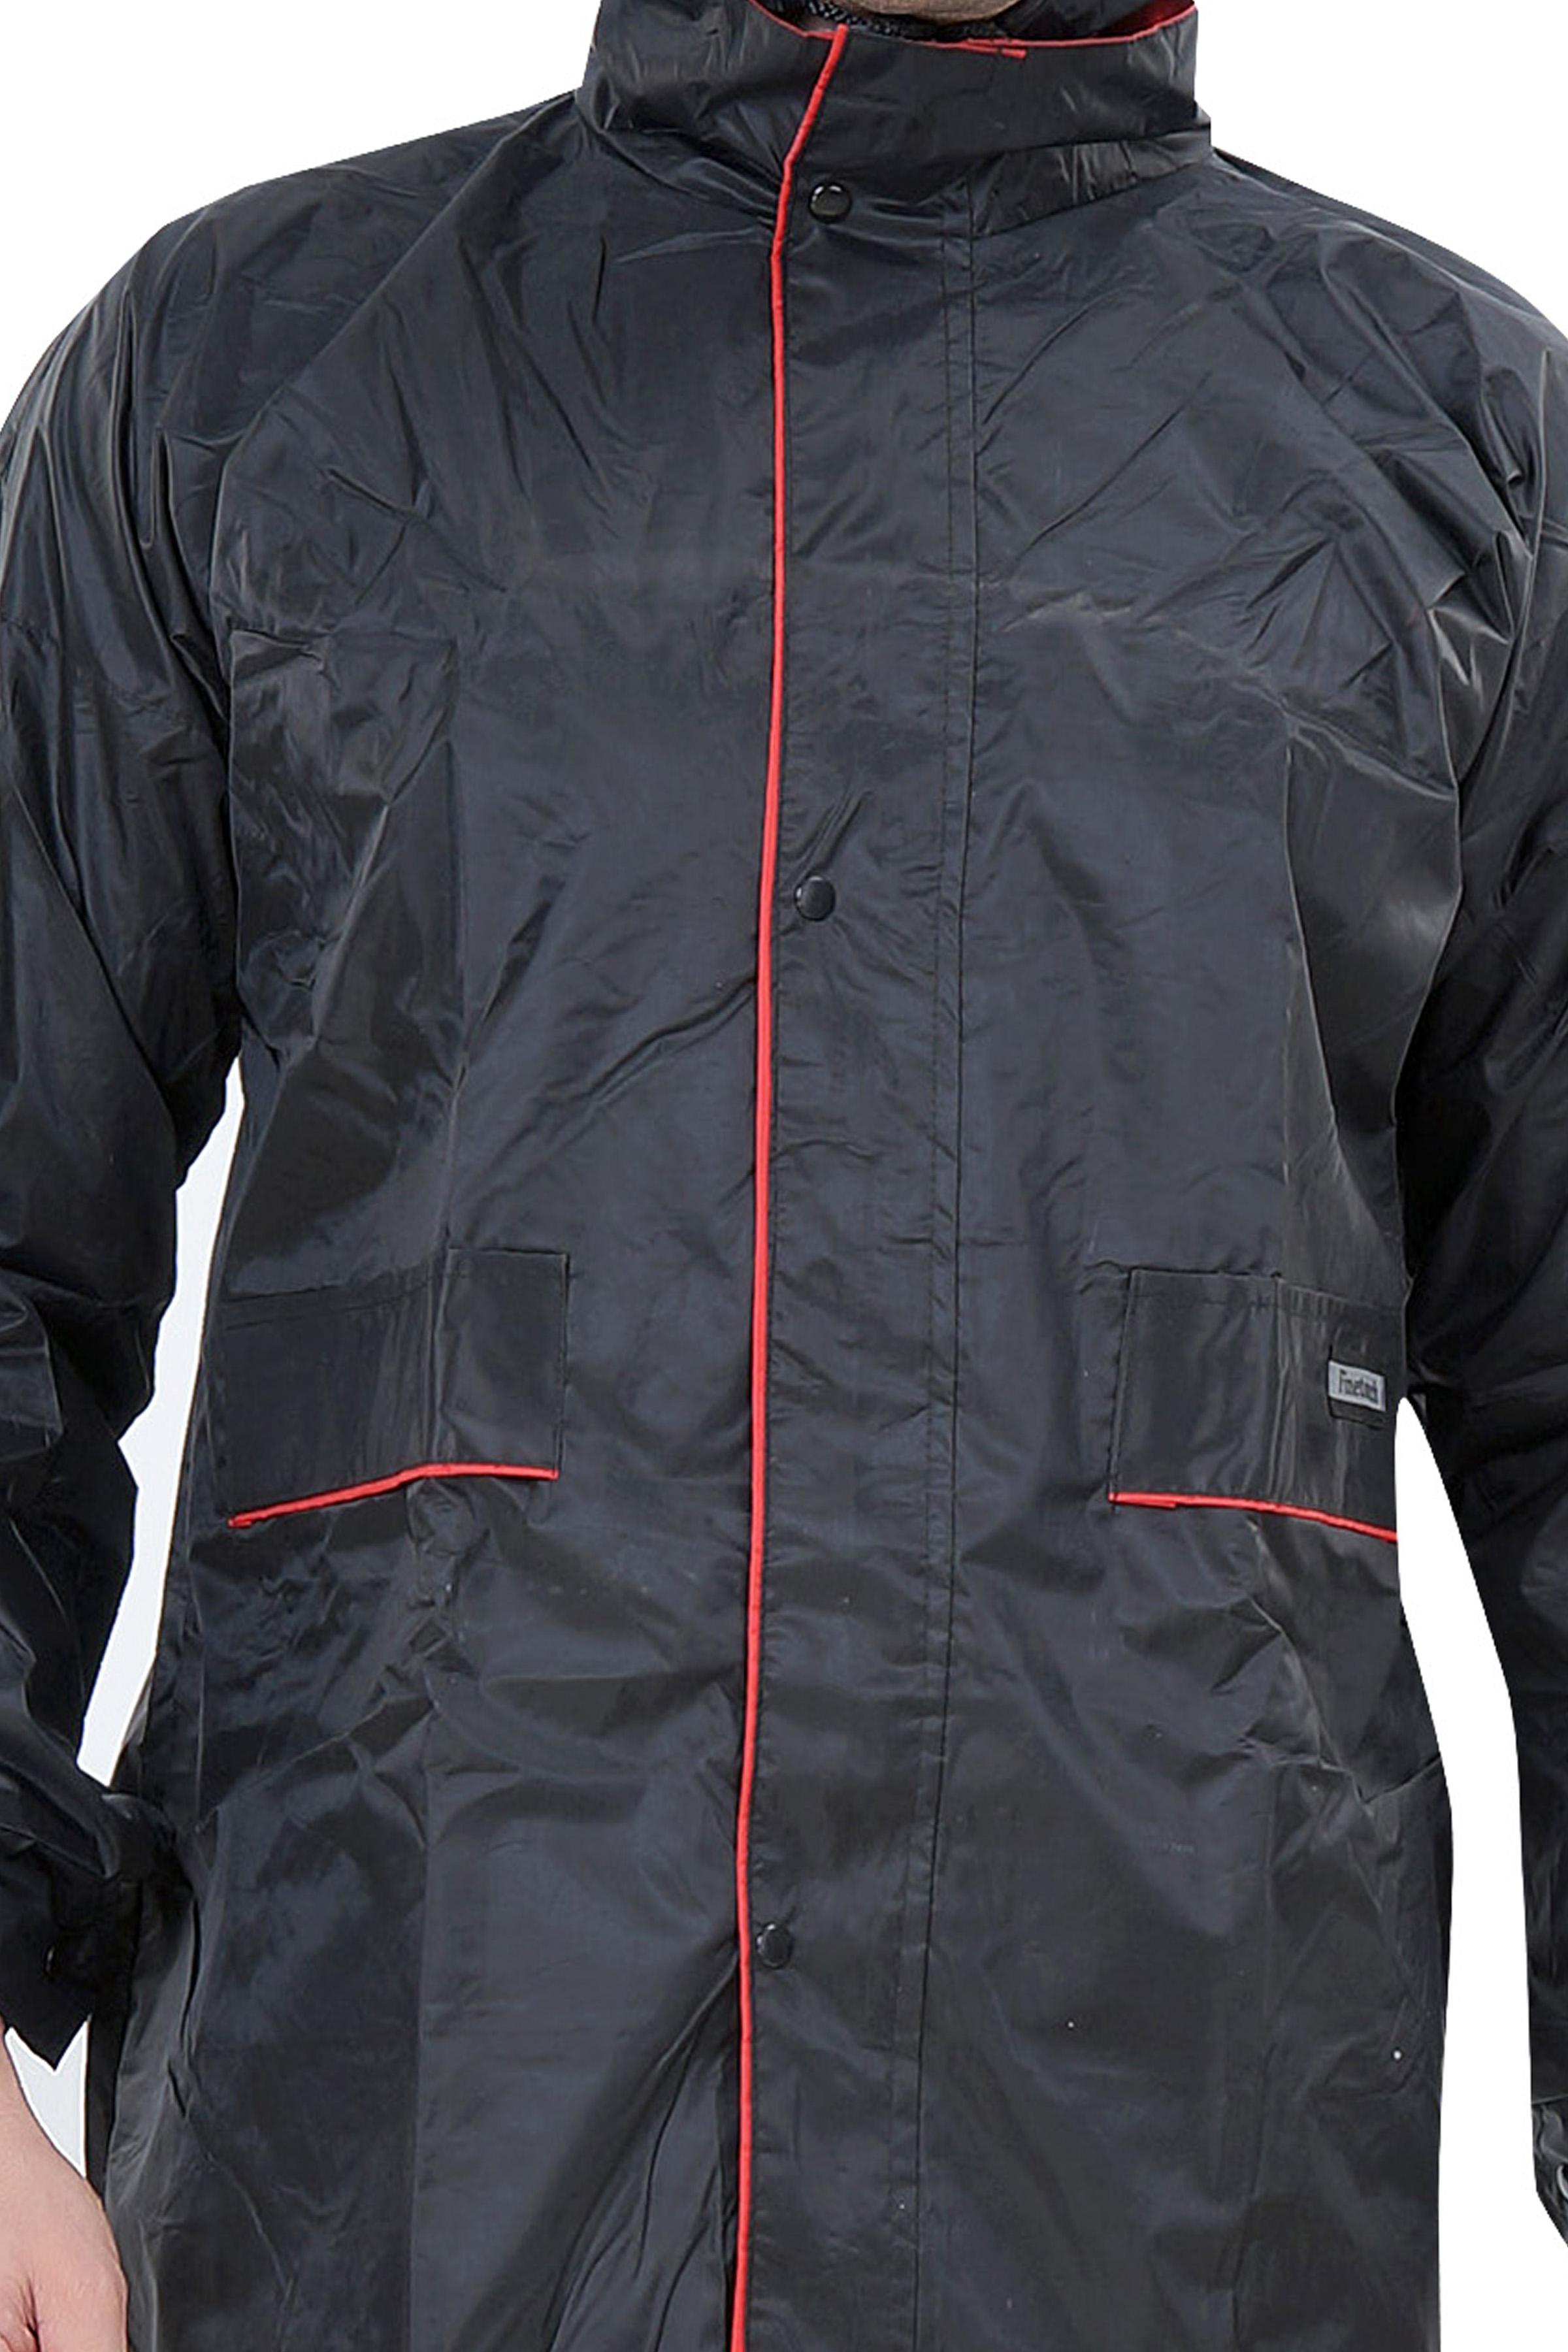 Buy Abc Garments Black Raincoat For Mens Online @ ₹1200 from ShopClues